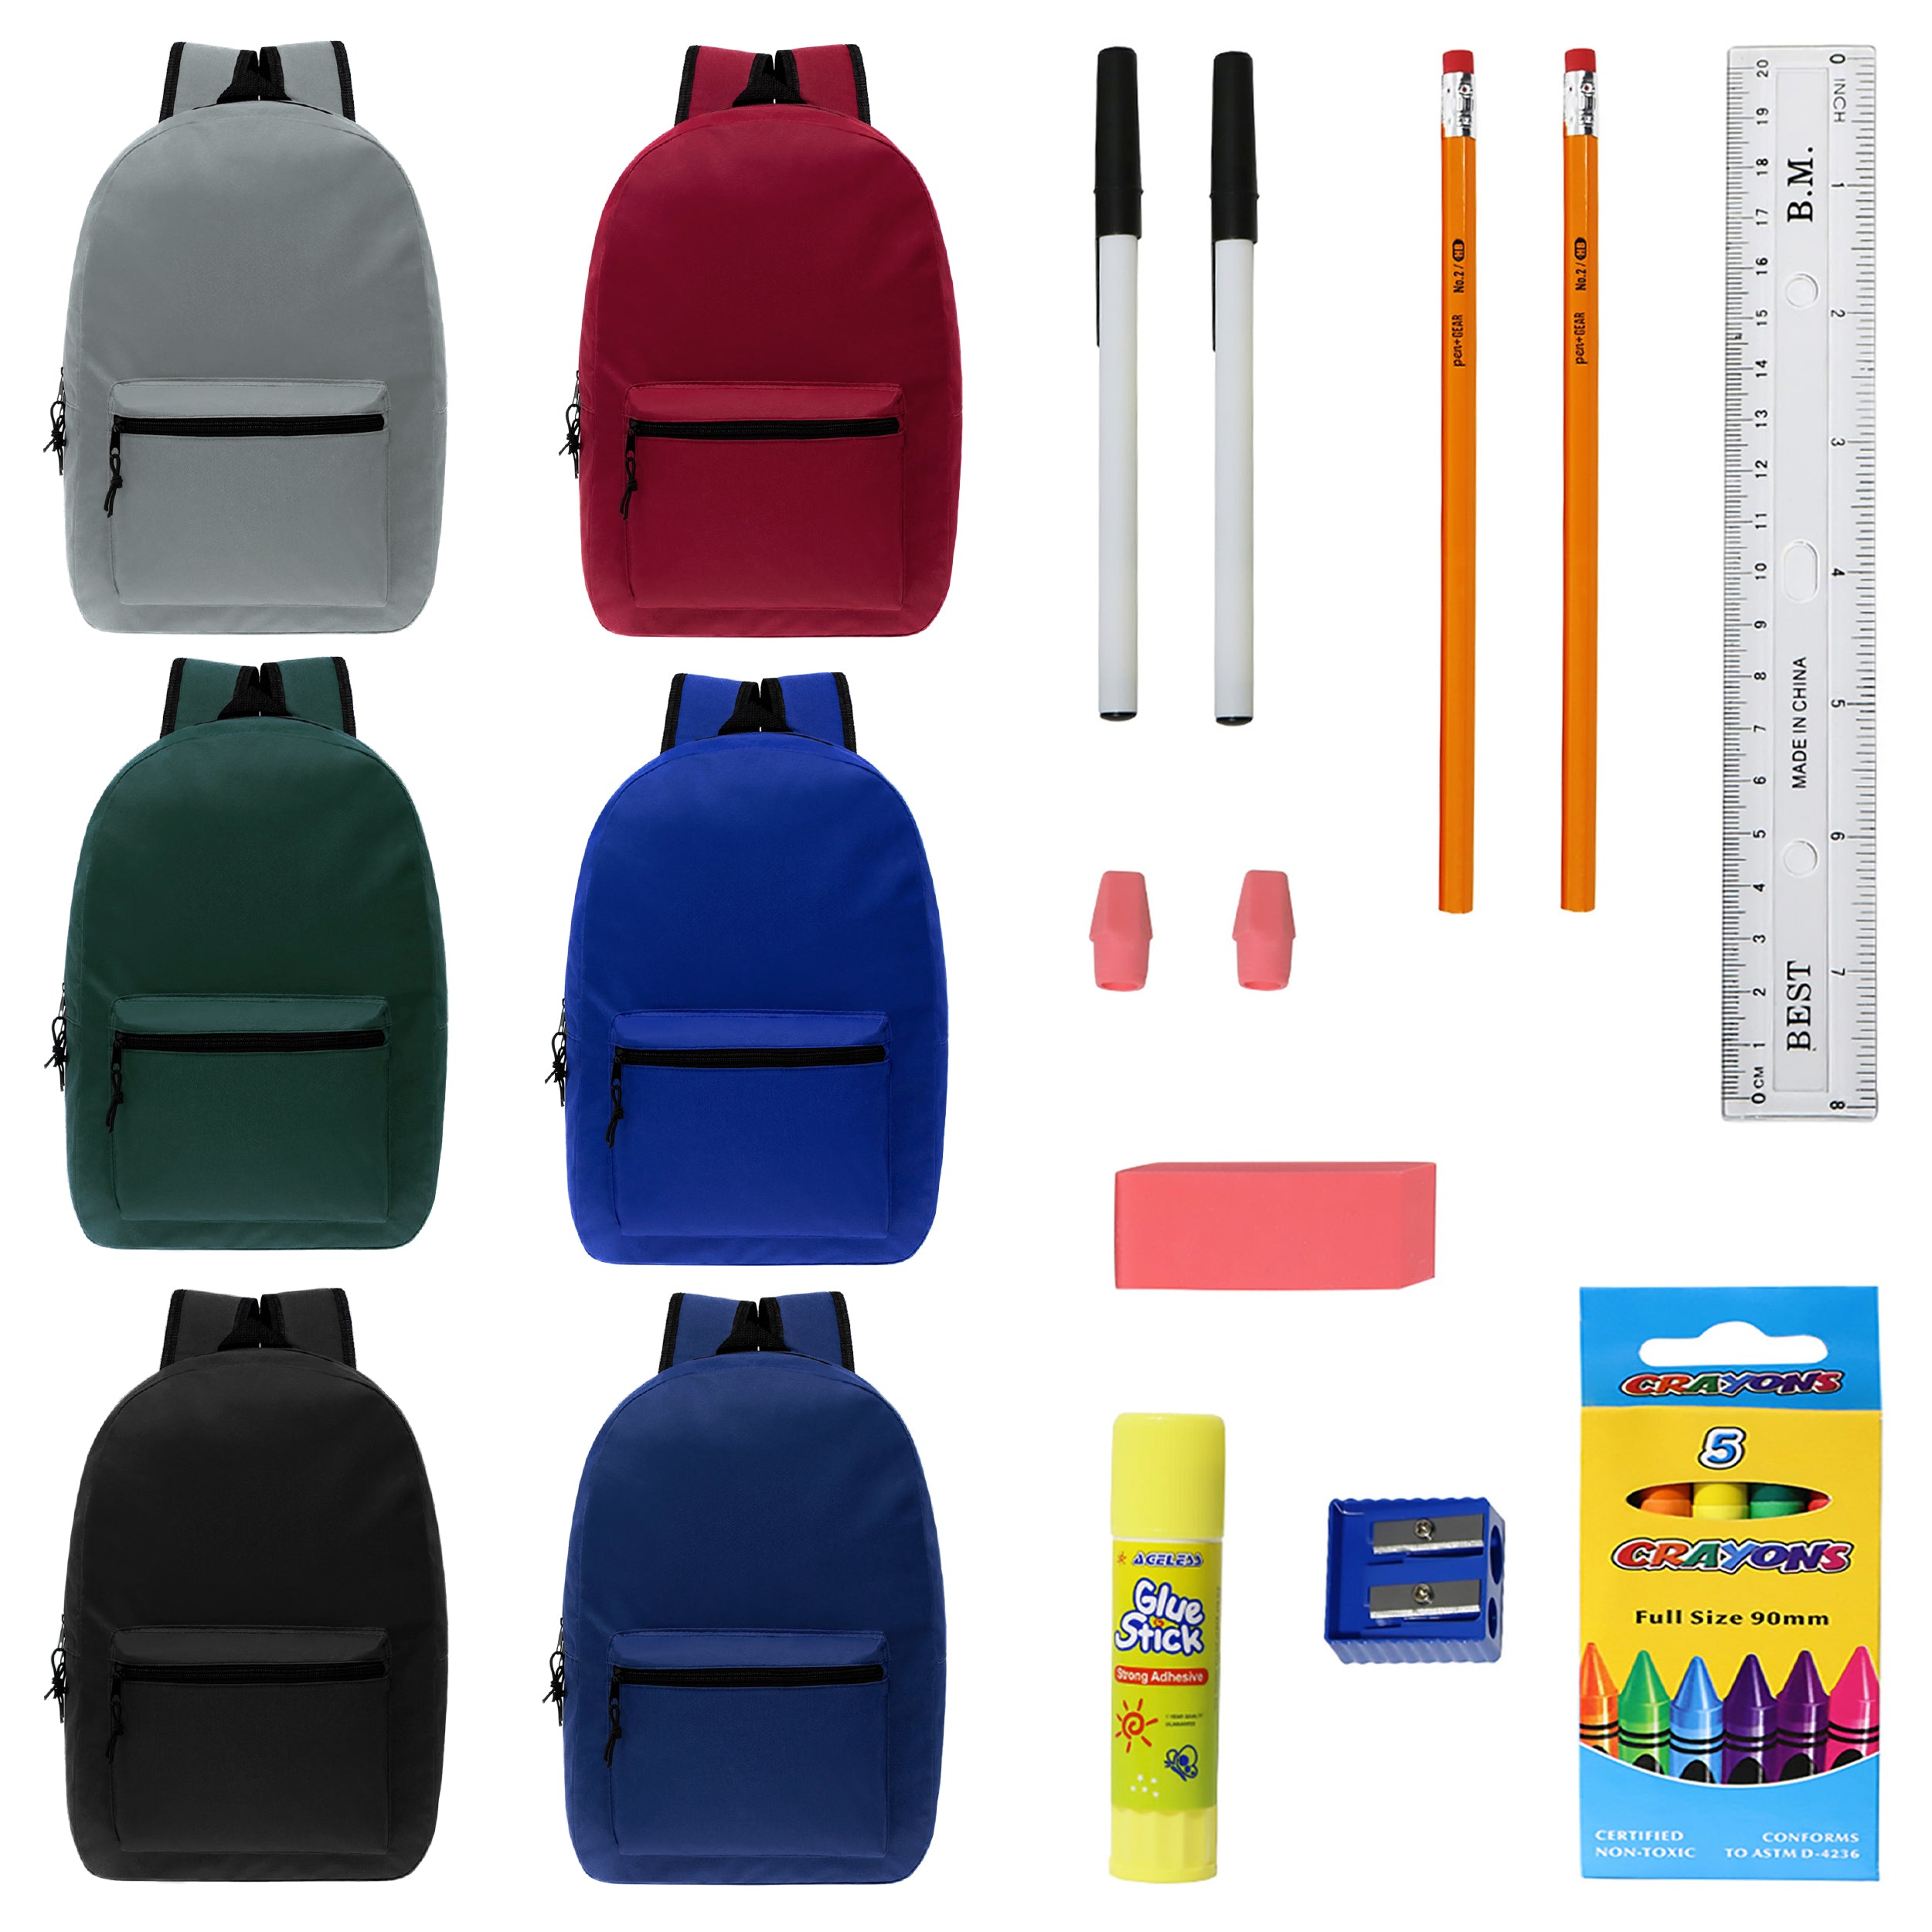 15 Inch Bulk Backpacks in Assorted Colors with School Supply Kits Wholesale - Case of 12